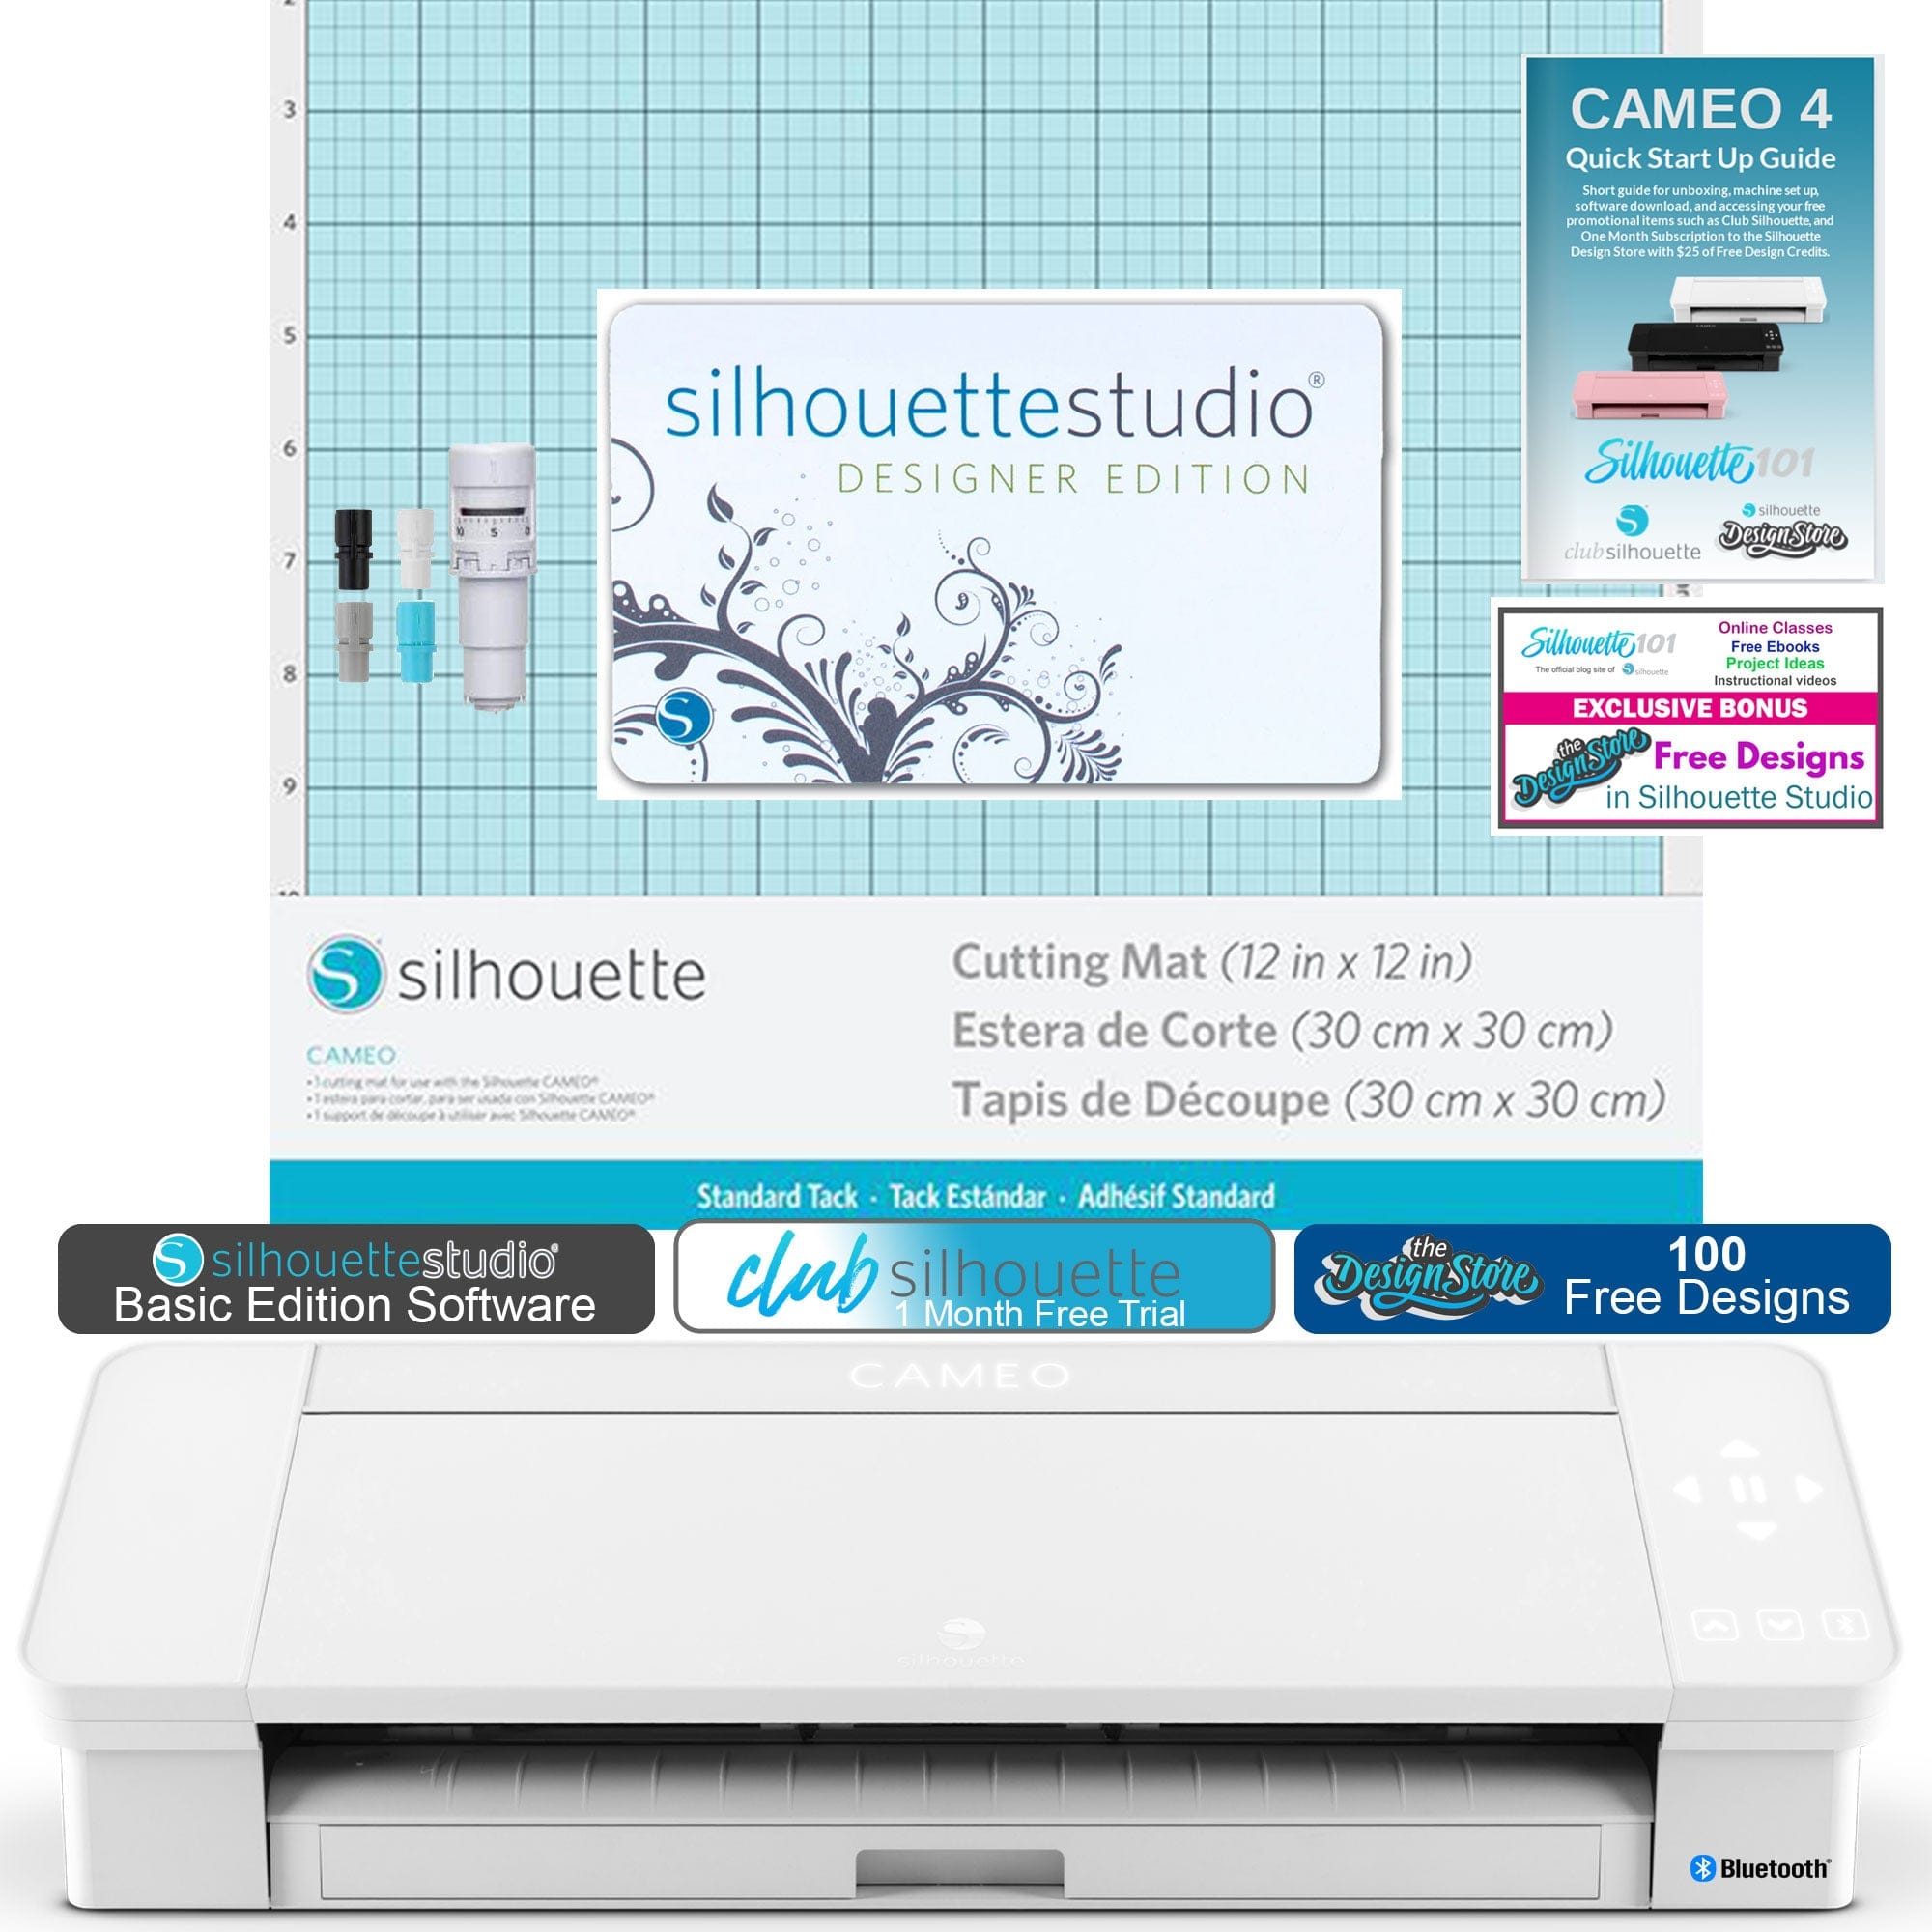 CAMEO 4: Details on Silhouette Studio Software and Upgrades